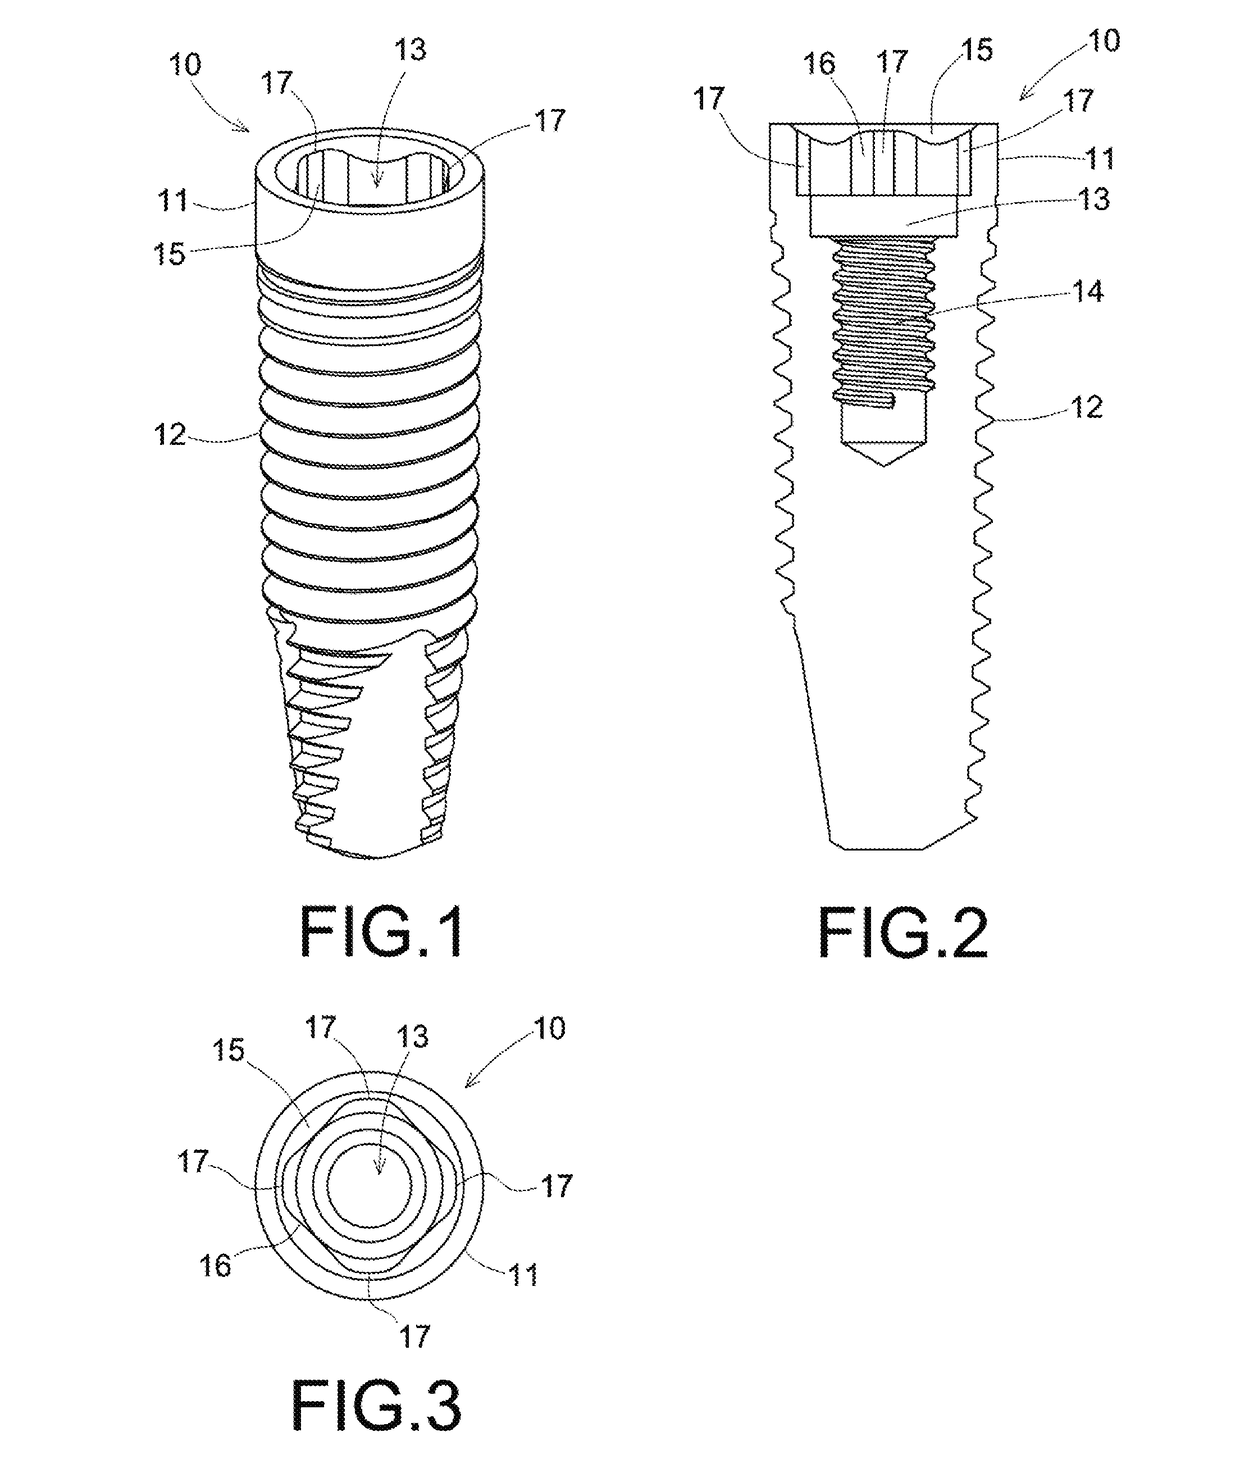 Set of a dental implant and prosthetic components, including a transepithelial sleeve with an Anti-rotational upper connection